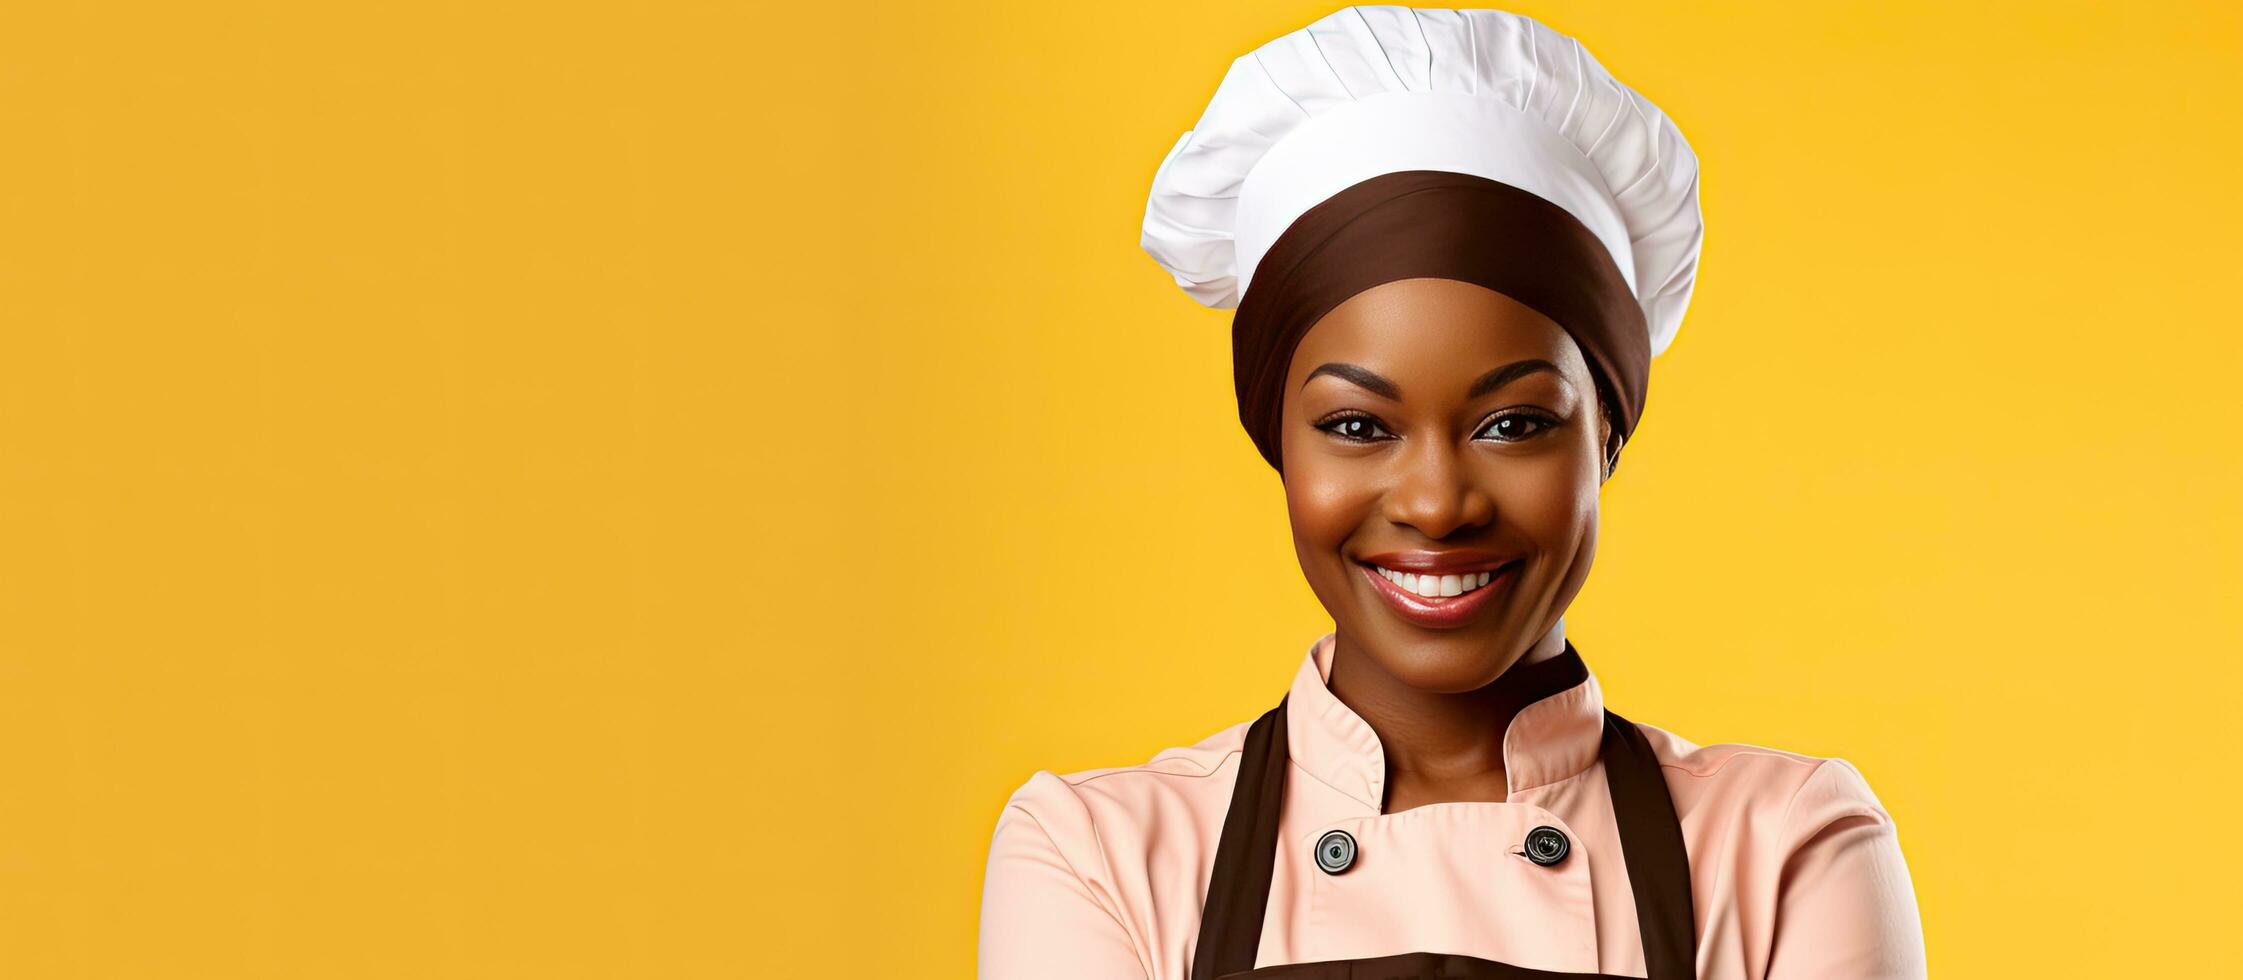 Smiling African American female chef holding oven mitt against yellow background photo